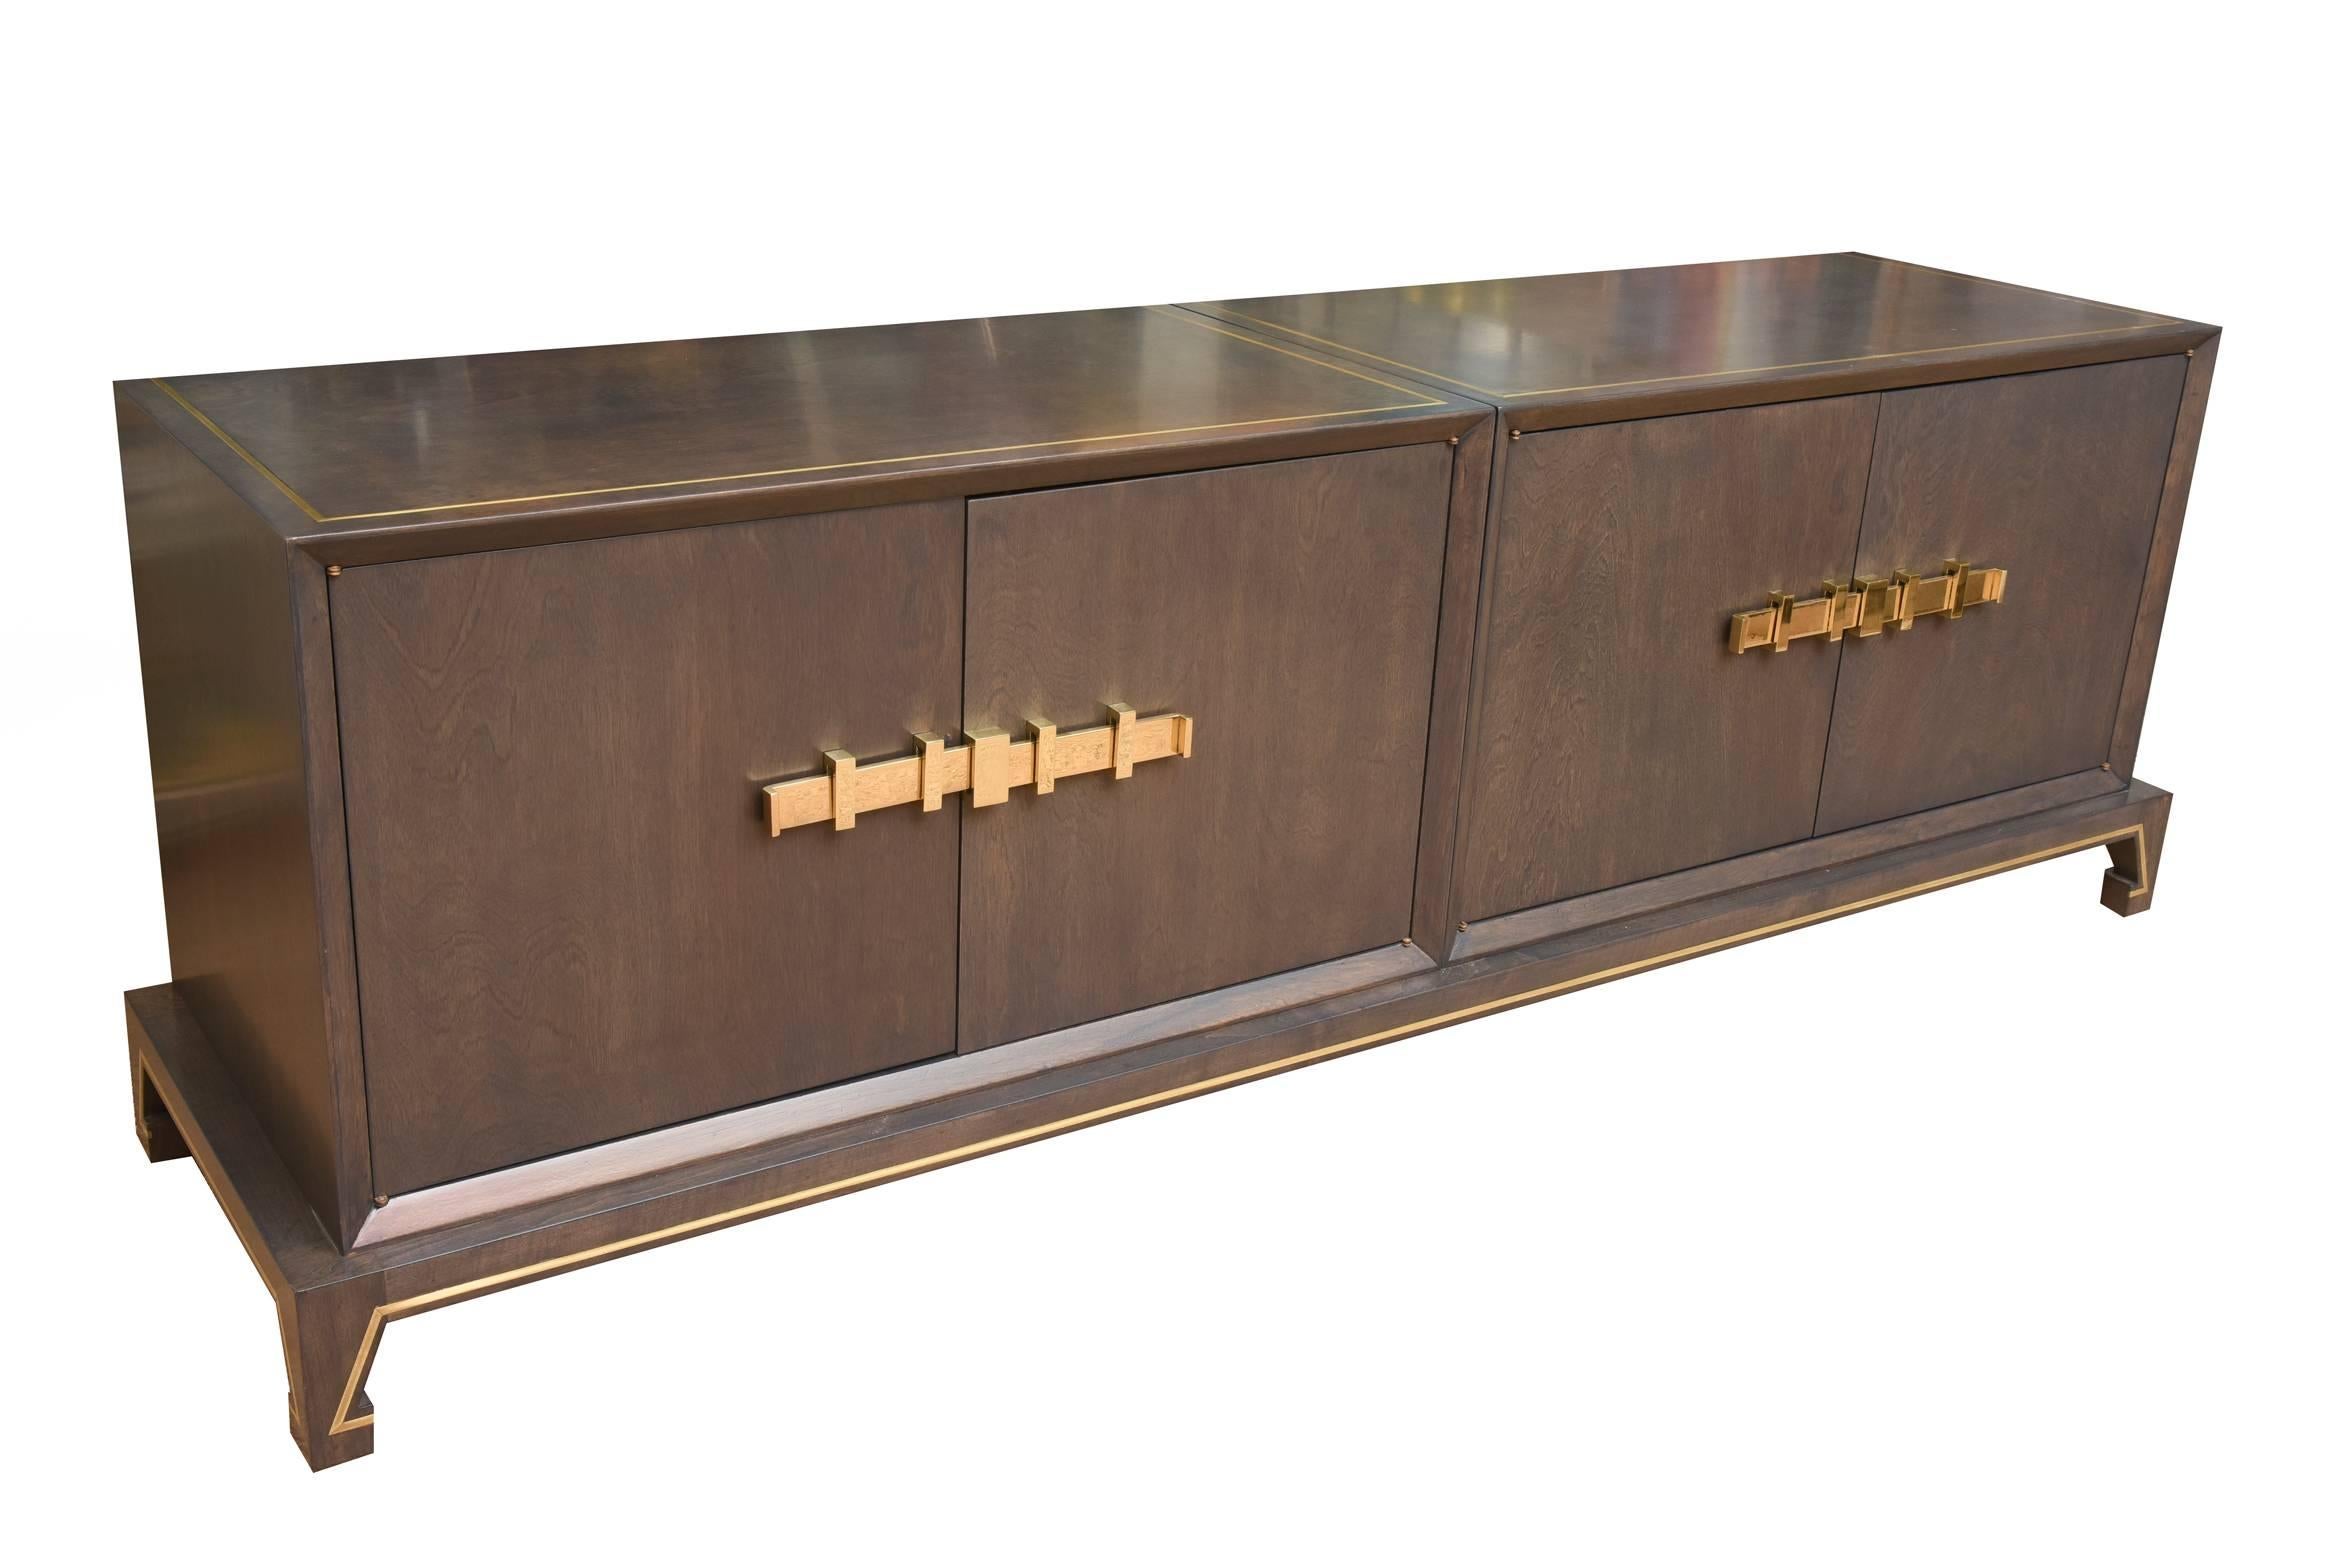 This magnificent and fully restored original vintage Tommi Parzinger Mid-Century Modern low cabinet is sculptural with its monumental polished solid brass hardware that opens the cabinet doors on both sides. It has brass inlay on the top and bottom